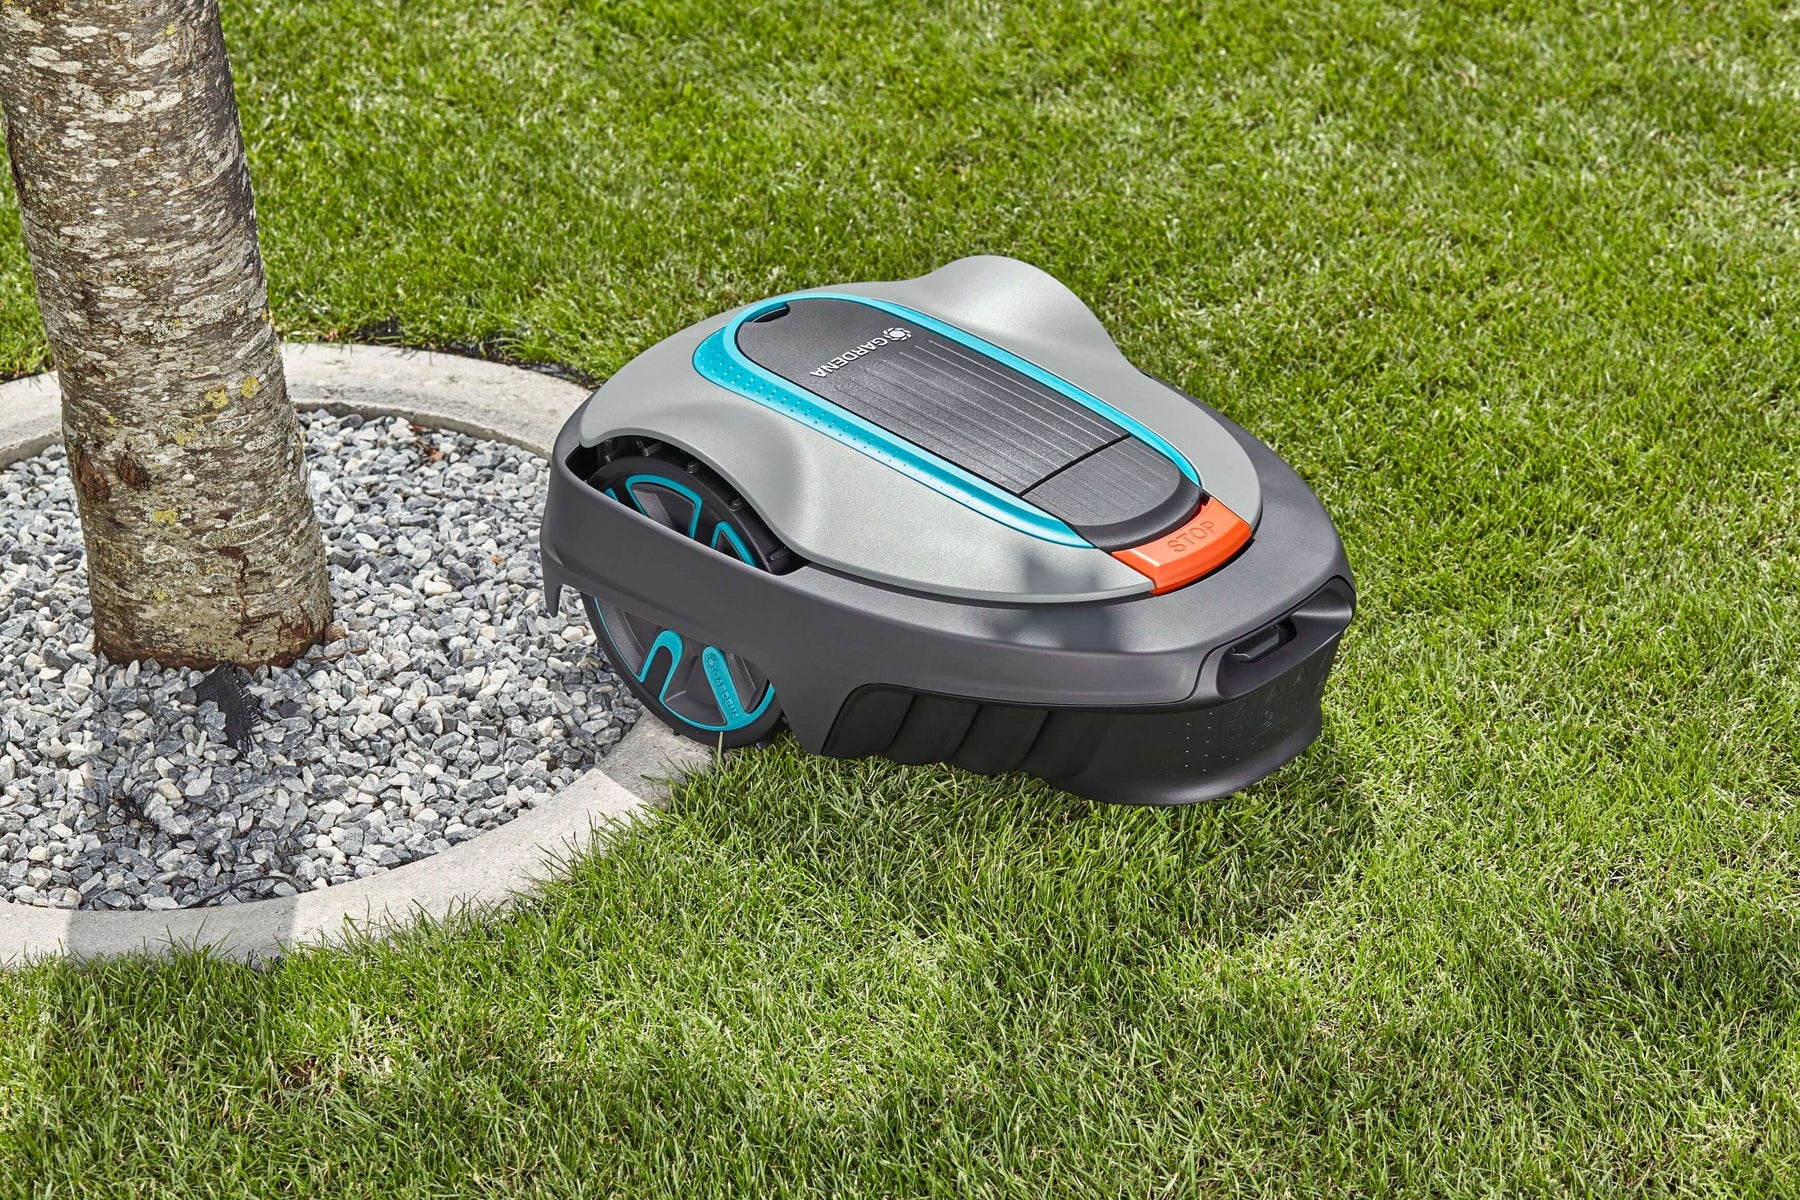 What's it like to have a robot lawn mower cutting your lawn?